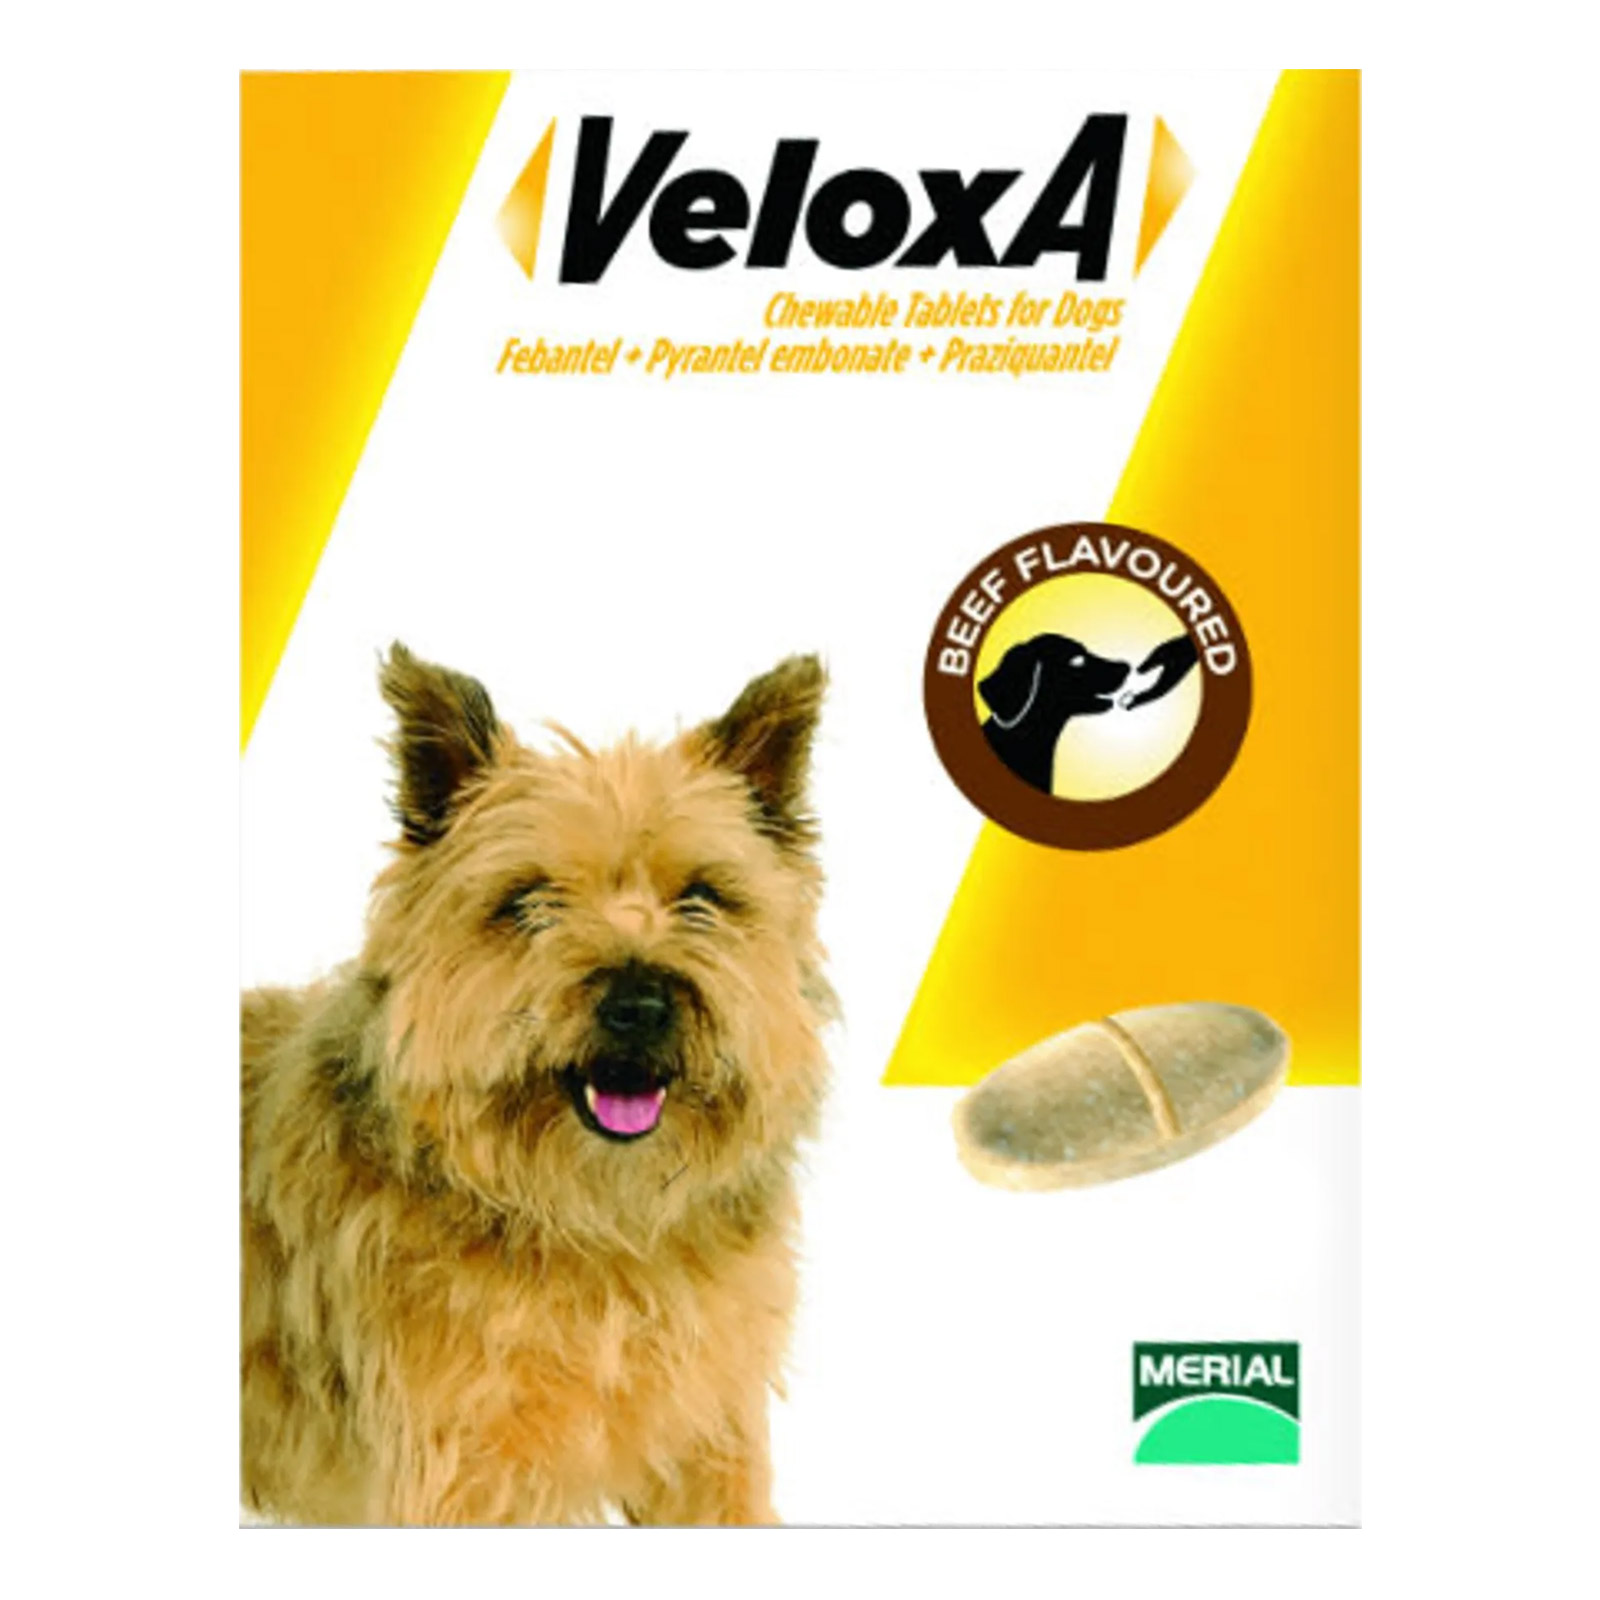 Veloxa Chewable Tablets For Dogs 8 Pack